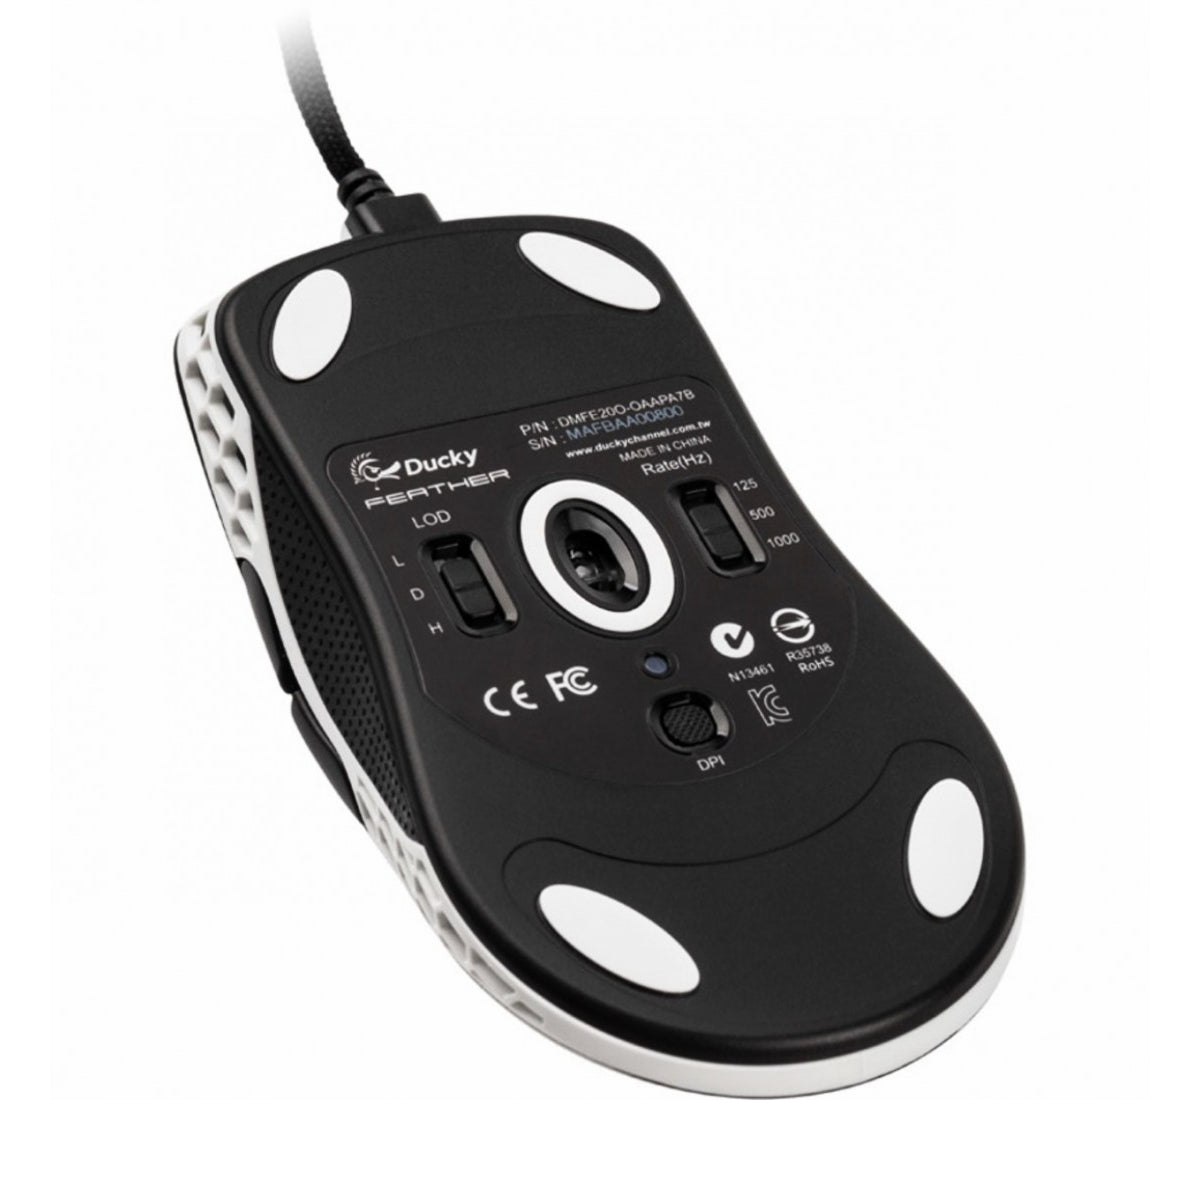 Ducky Feather Black & White Wired Gaming Mouse - Kailh - Store 974 | ستور ٩٧٤